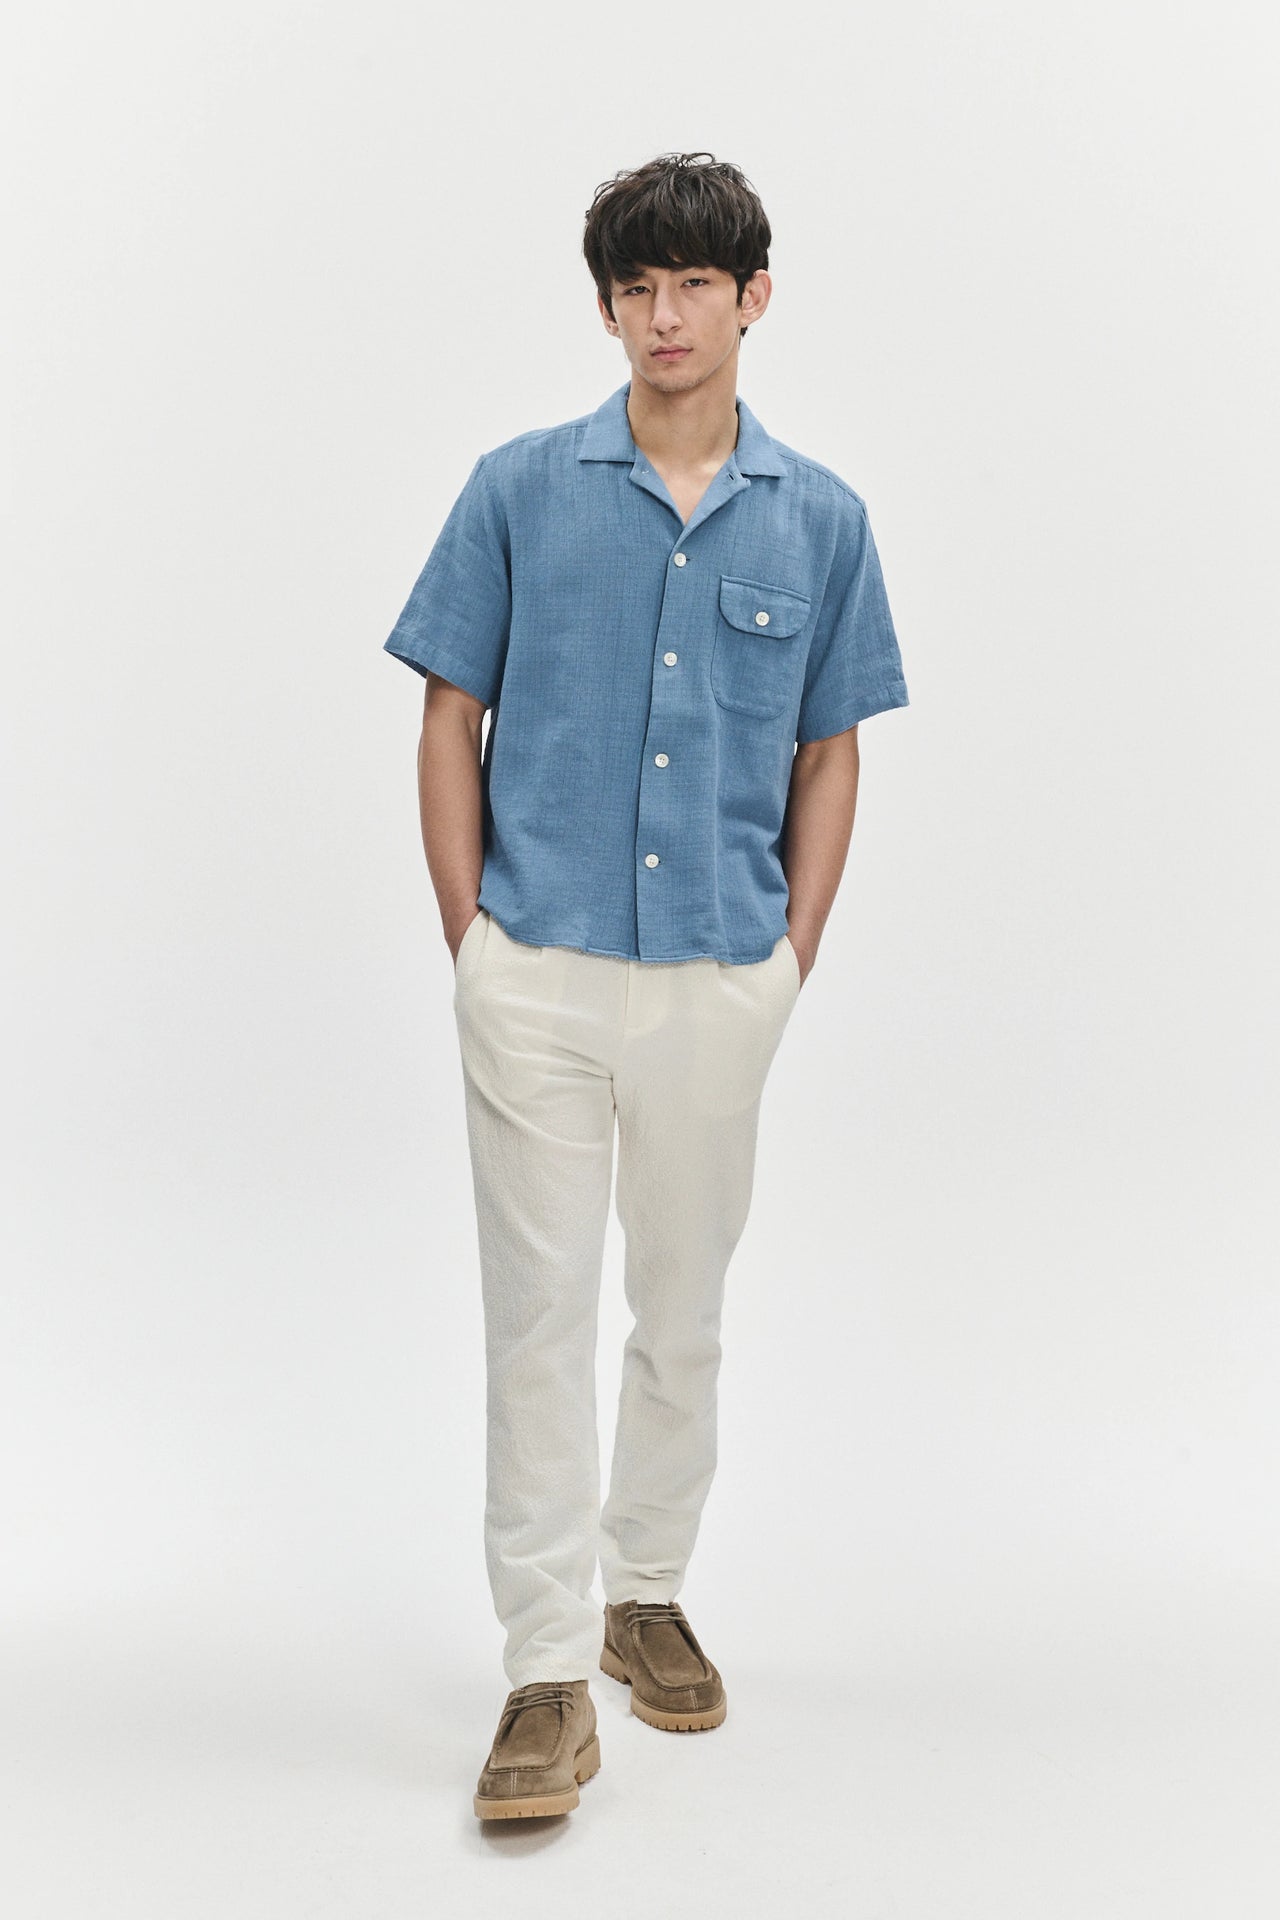 Short Sleeve Camp Collar Shirt  in a Blue Airy Structural Portuguese Cotton